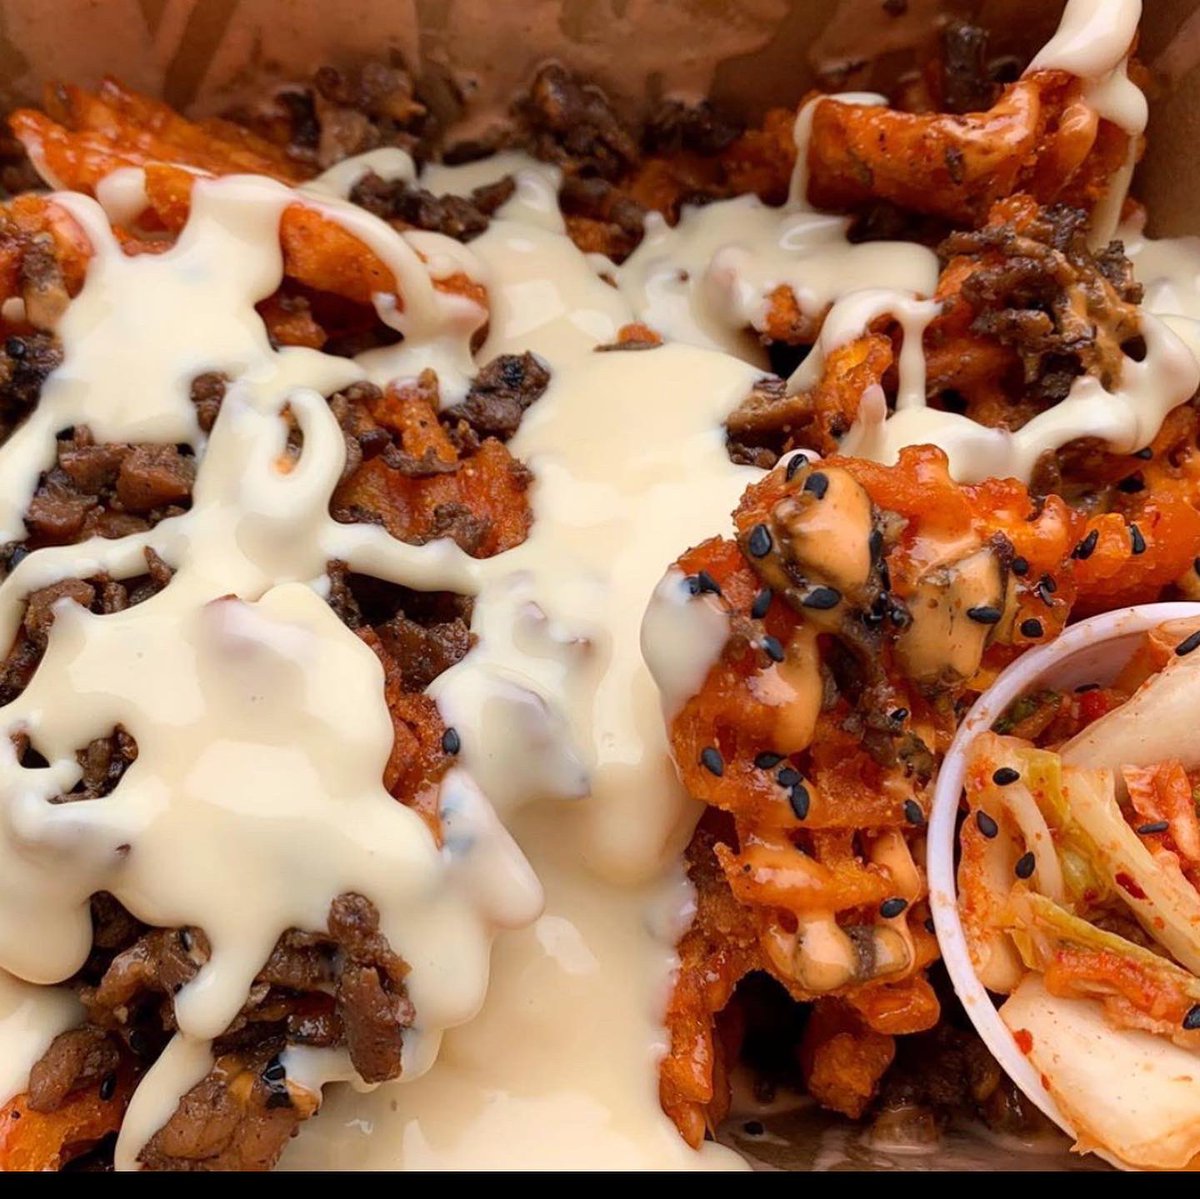 How it started vs. how it’s going ➡️😜 #SeoulTaco 
___
📸: IG travelfoodiestl 

#STL #StLouis #Chicago #fries #wafflesfries #sweetpotatofries #stlfood #chicagofood